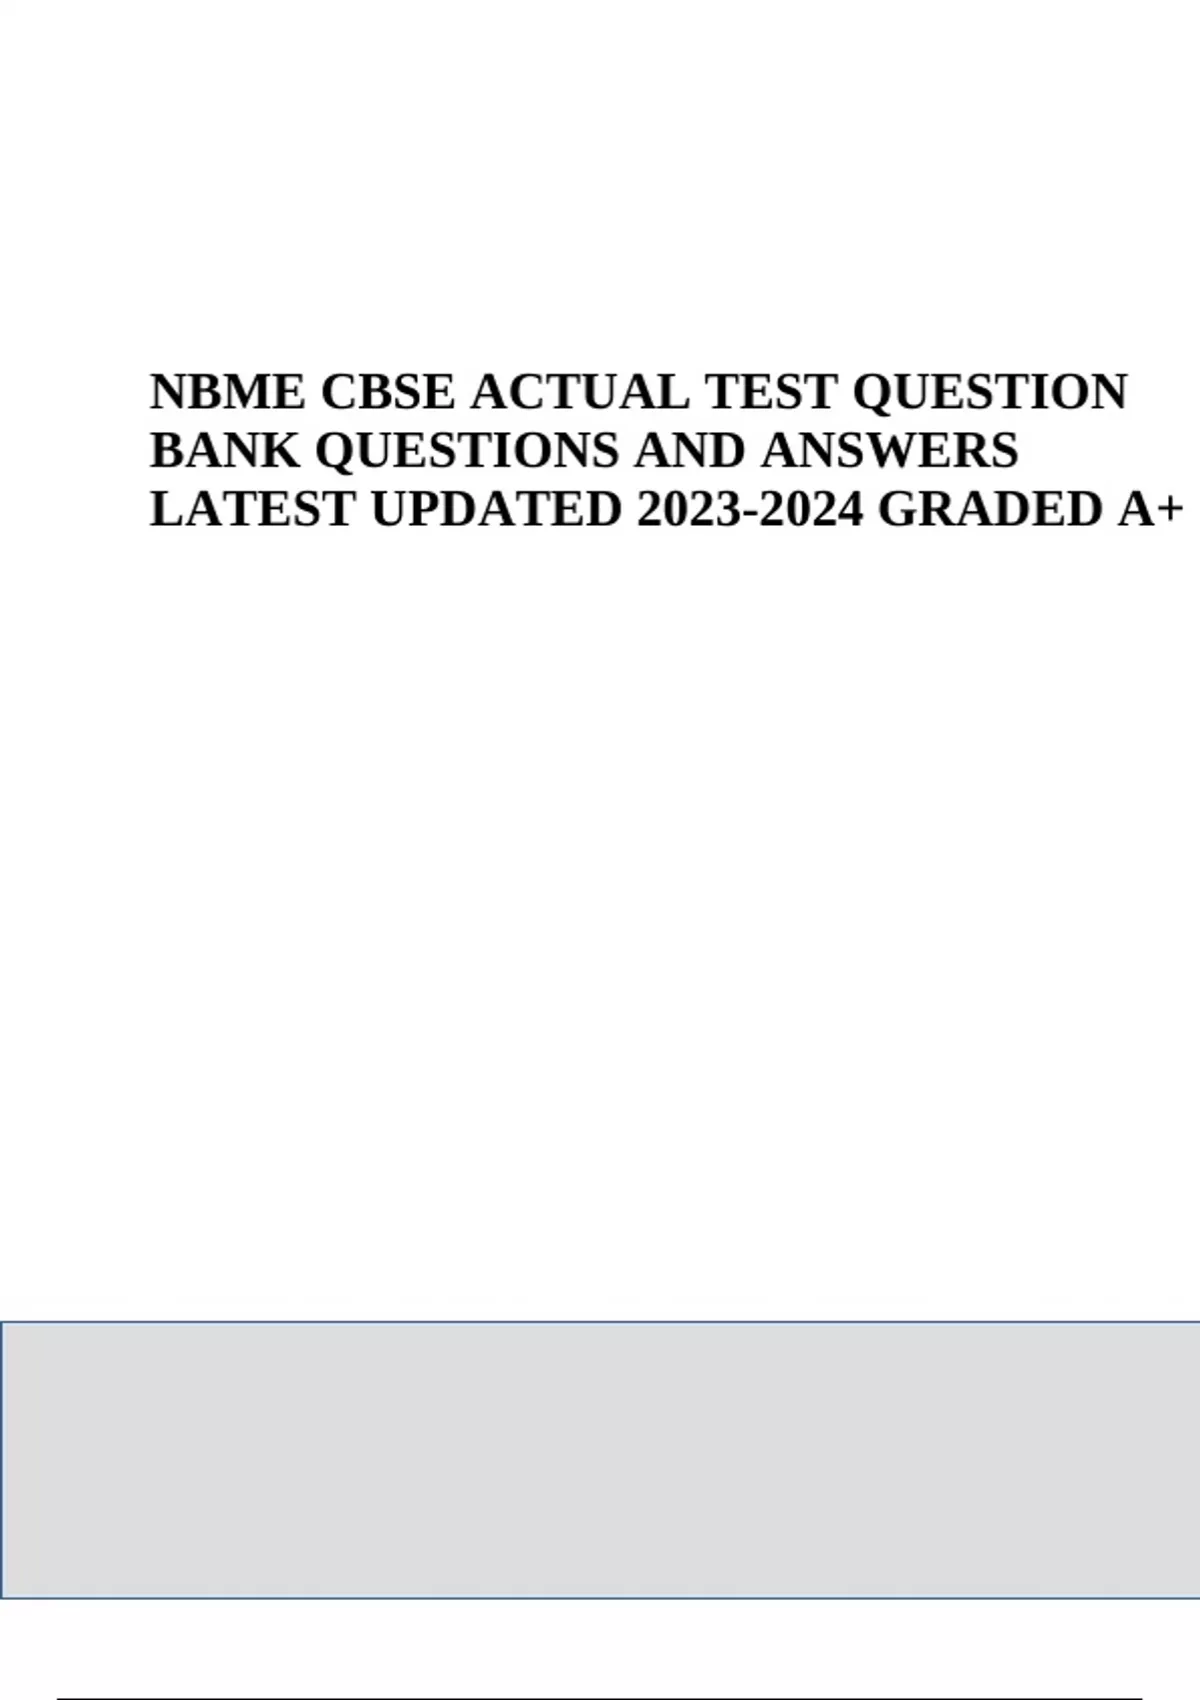 NBME CBSE ACTUAL TEST QUESTION BANK QUESTIONS AND ANSWERS LATEST